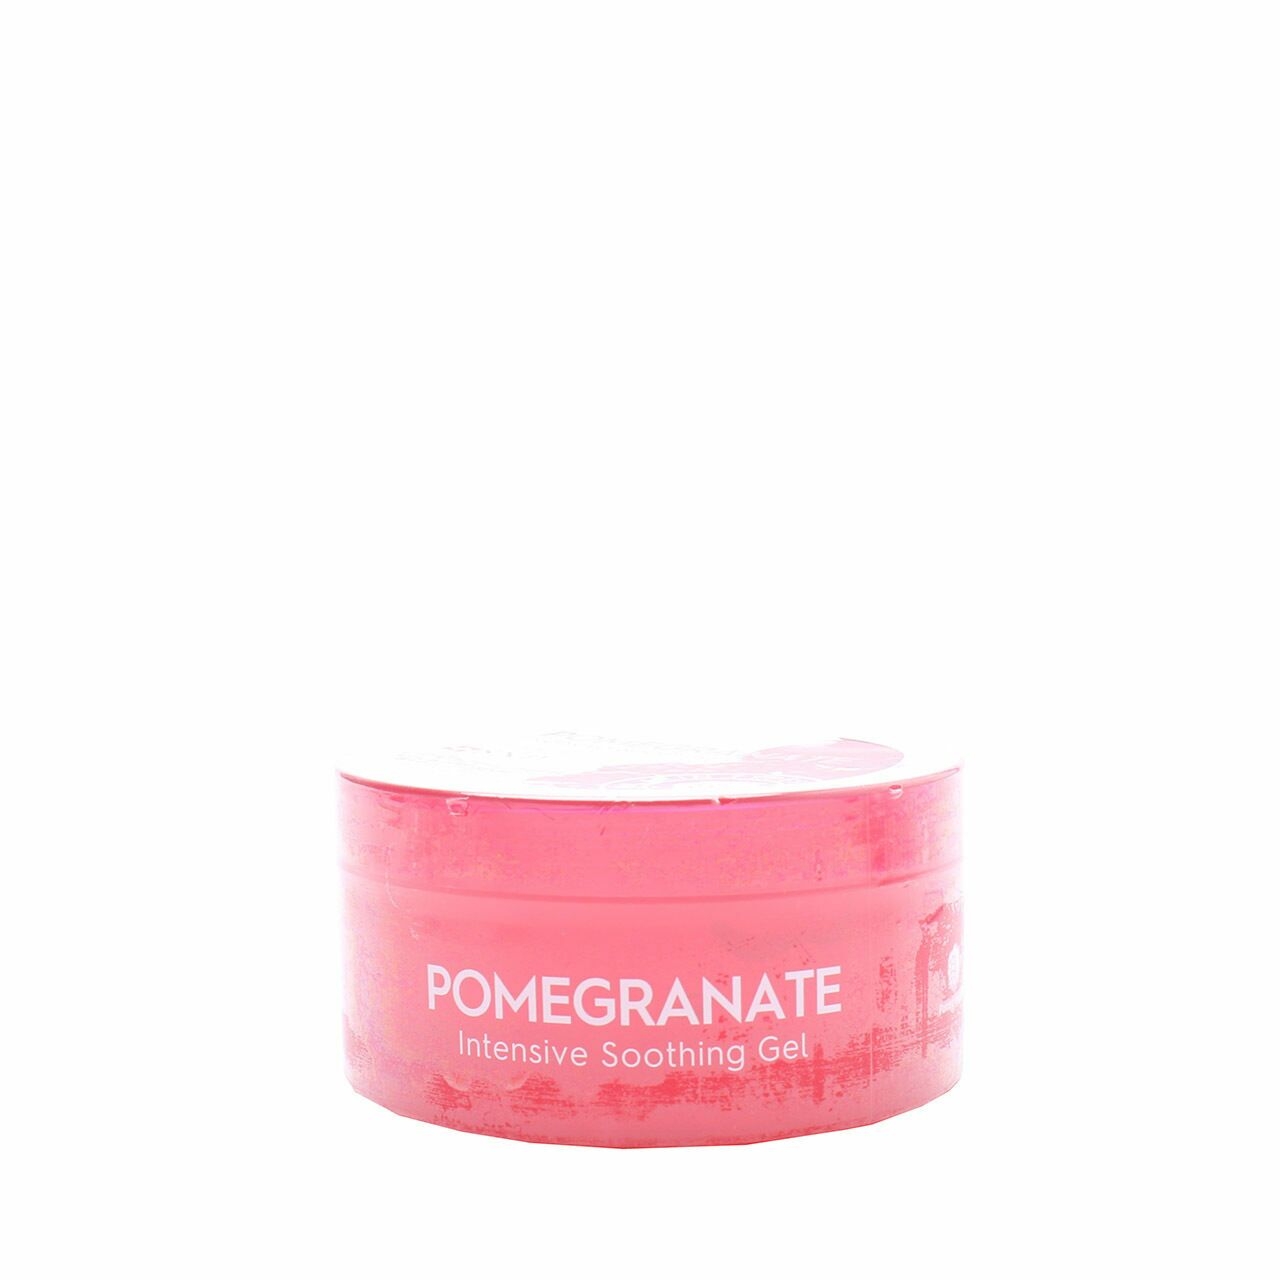 Private Collection Pomegranate insentive sooting gel Skin Care